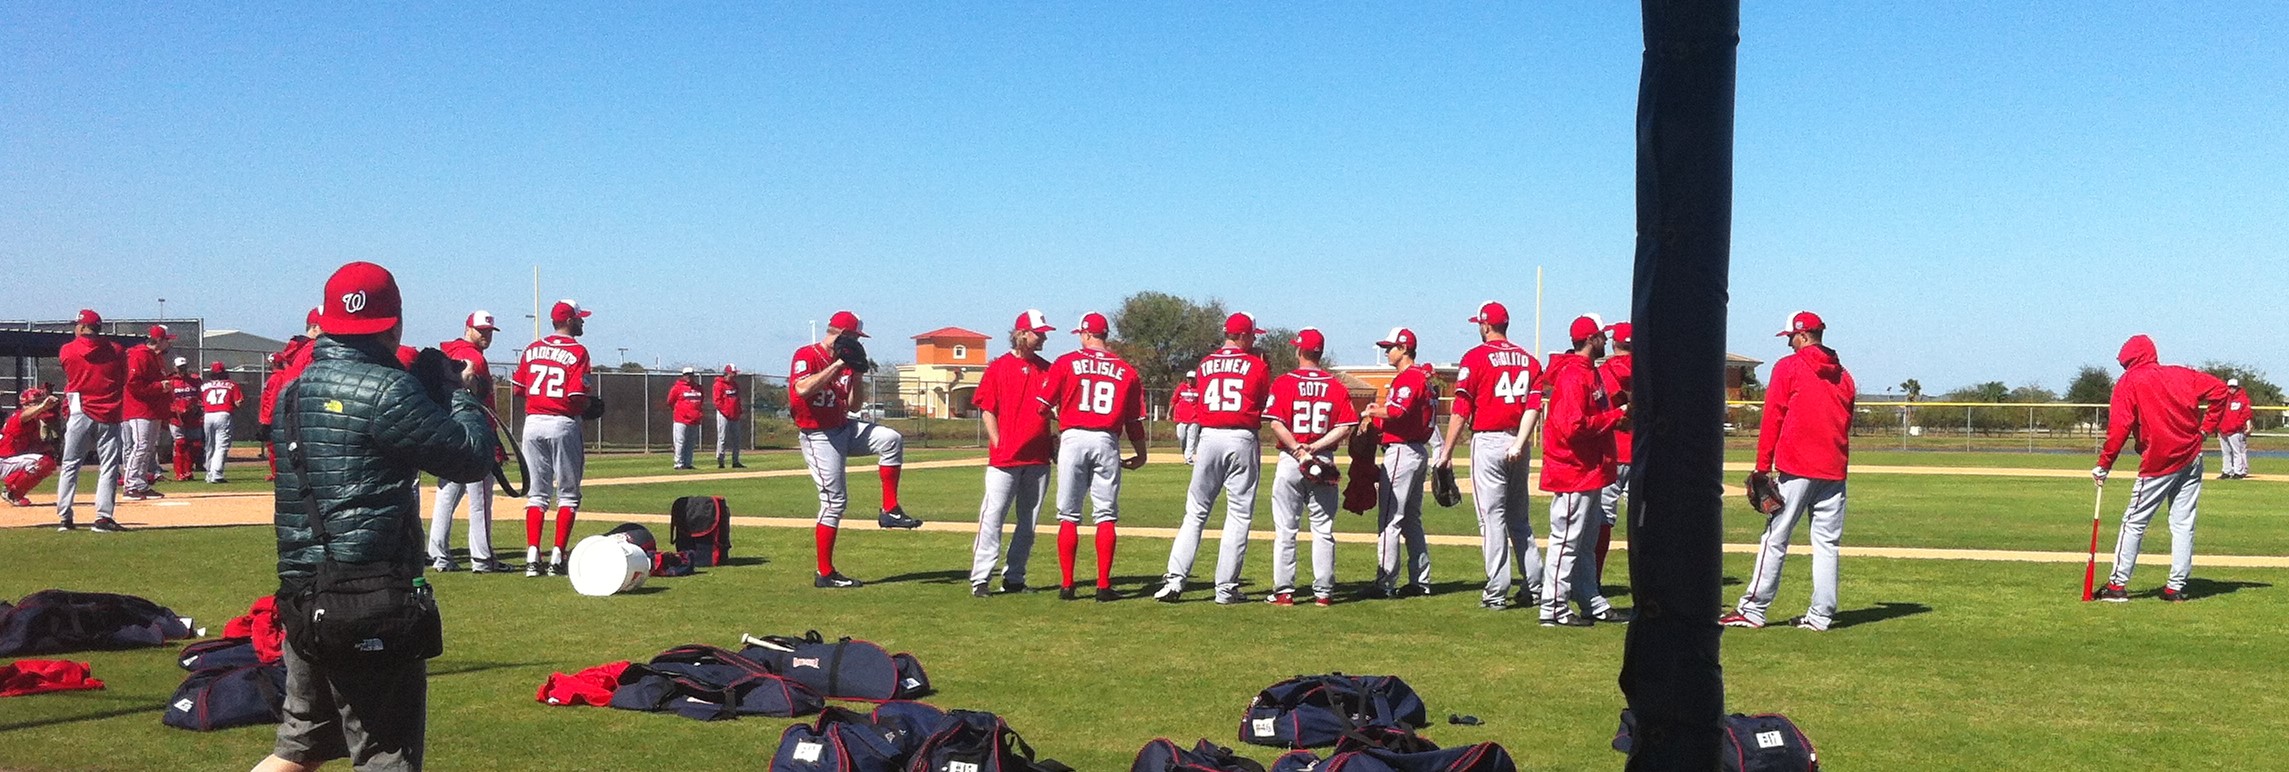 Spring Training camps are officially open!